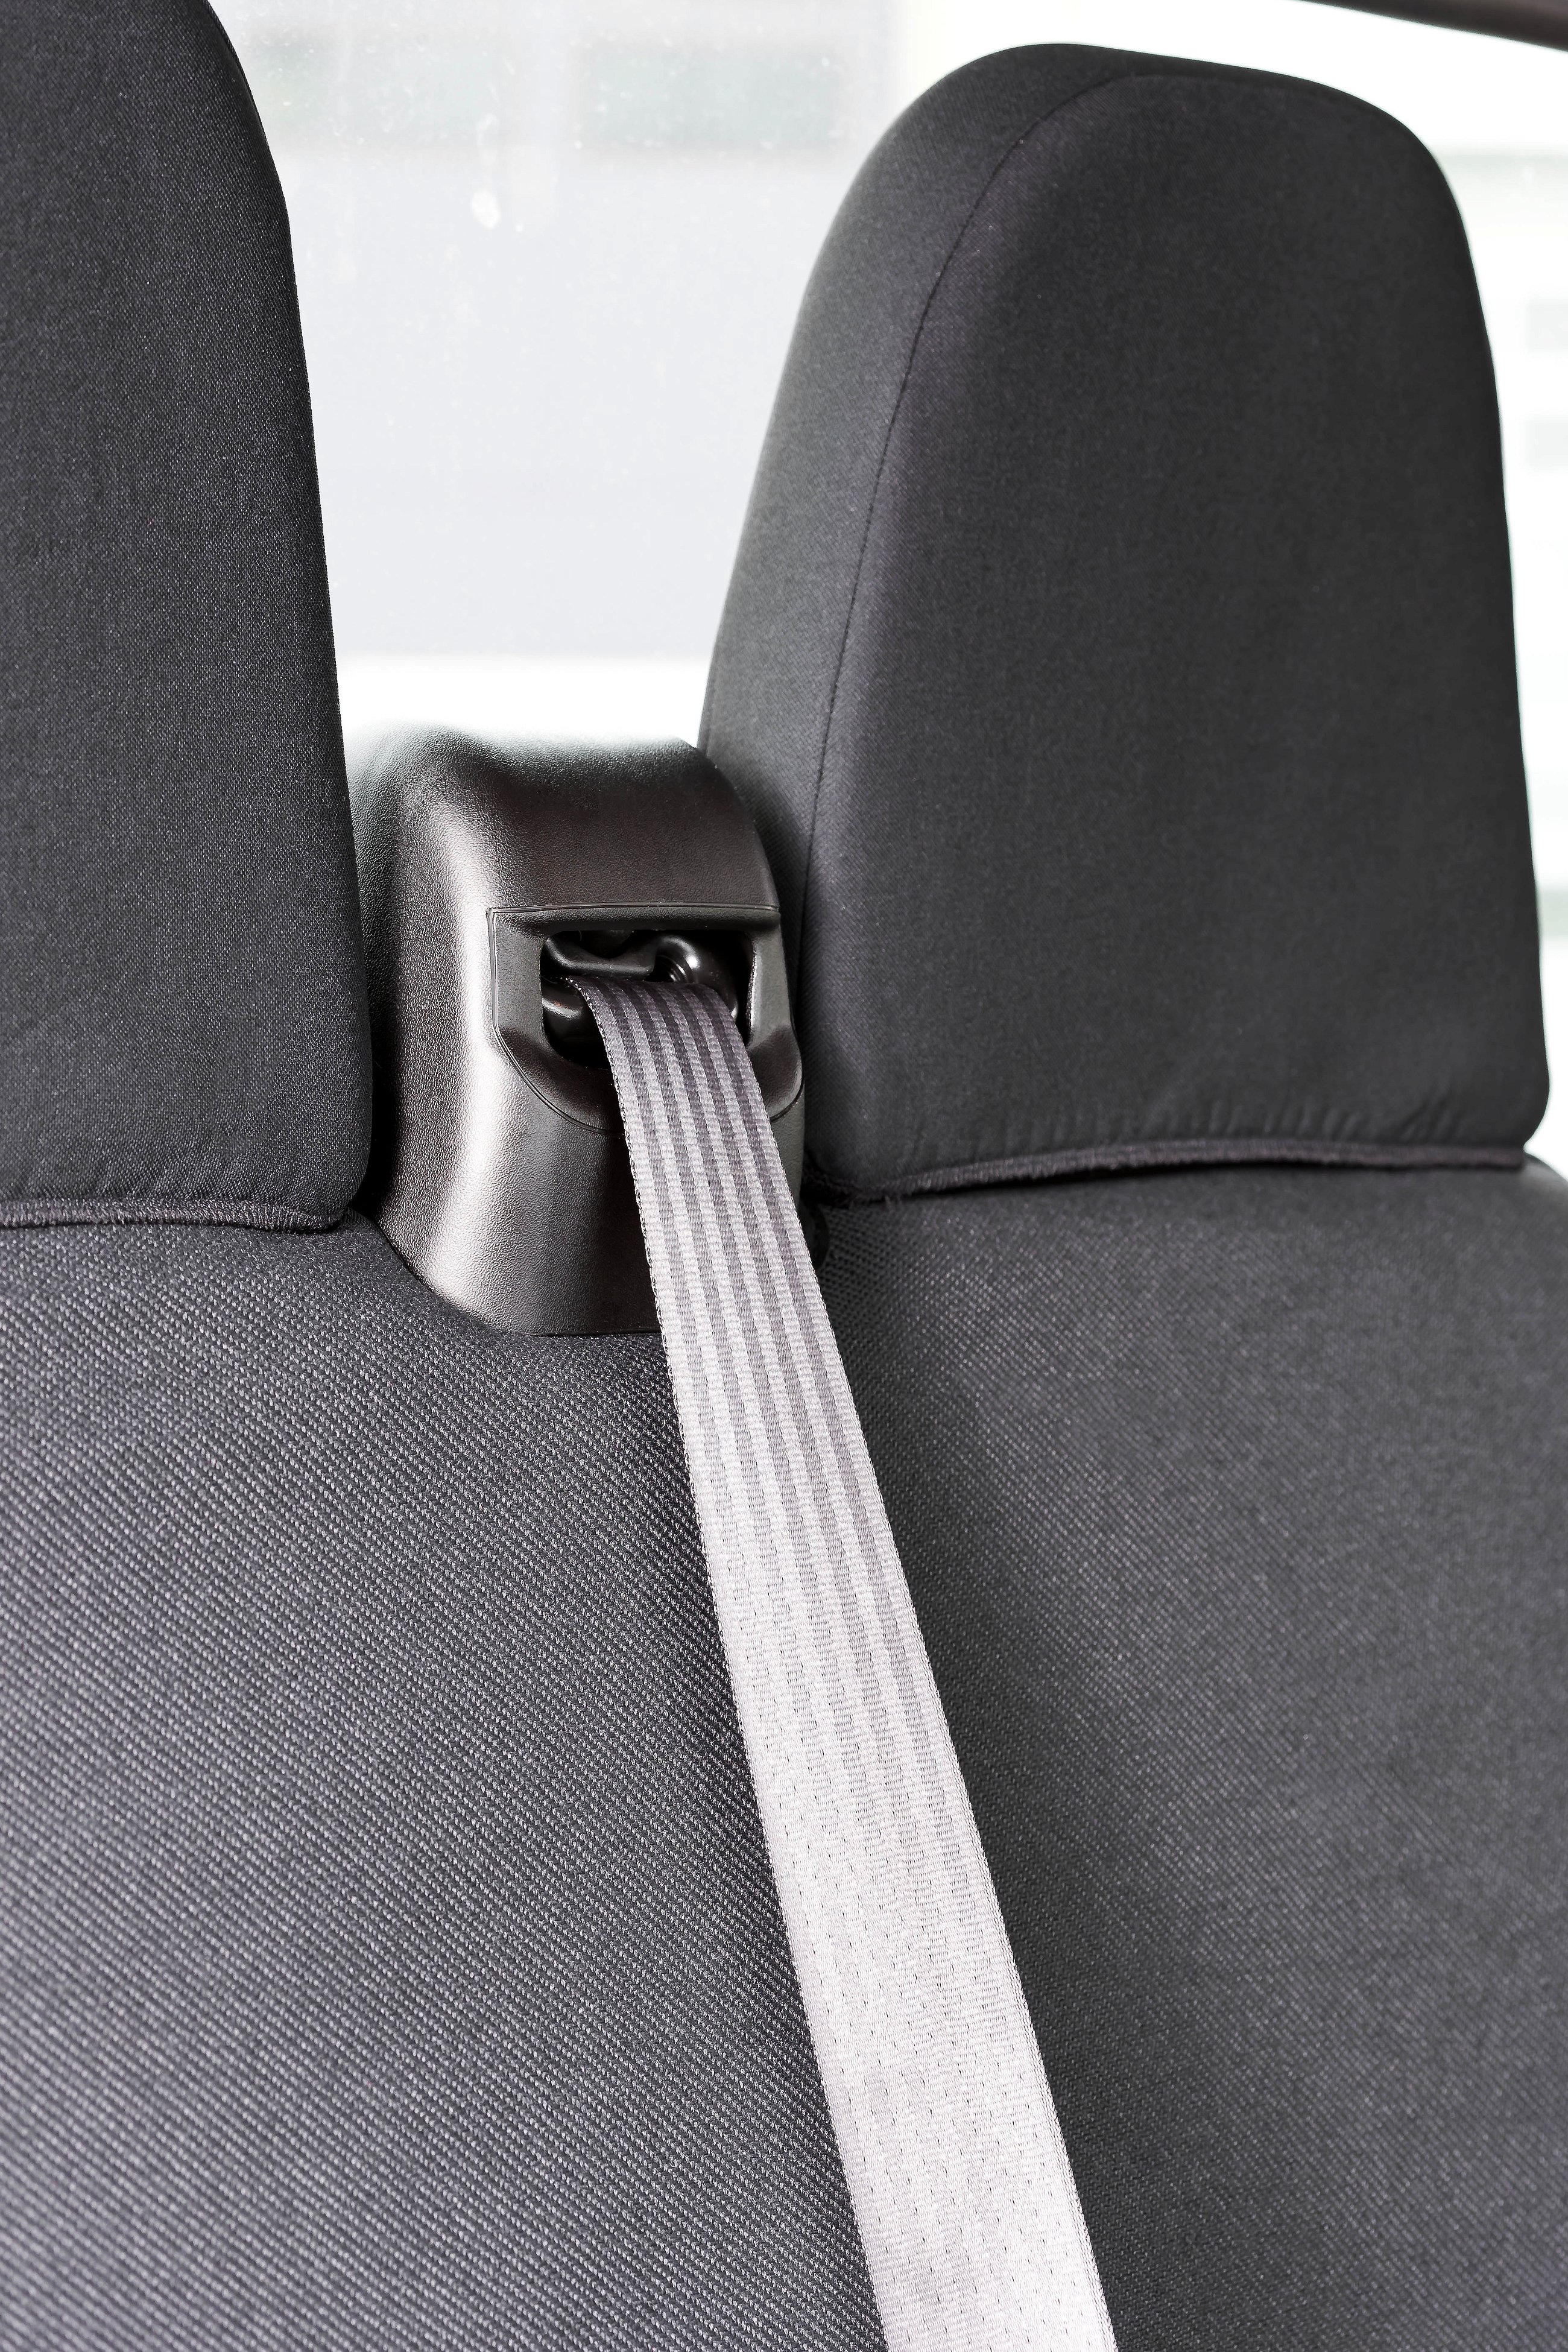 Charcoal Black Leatherette Trim To Fit A Iveco Daily 2006 Van 1 Single + 1 Double Seat Covers